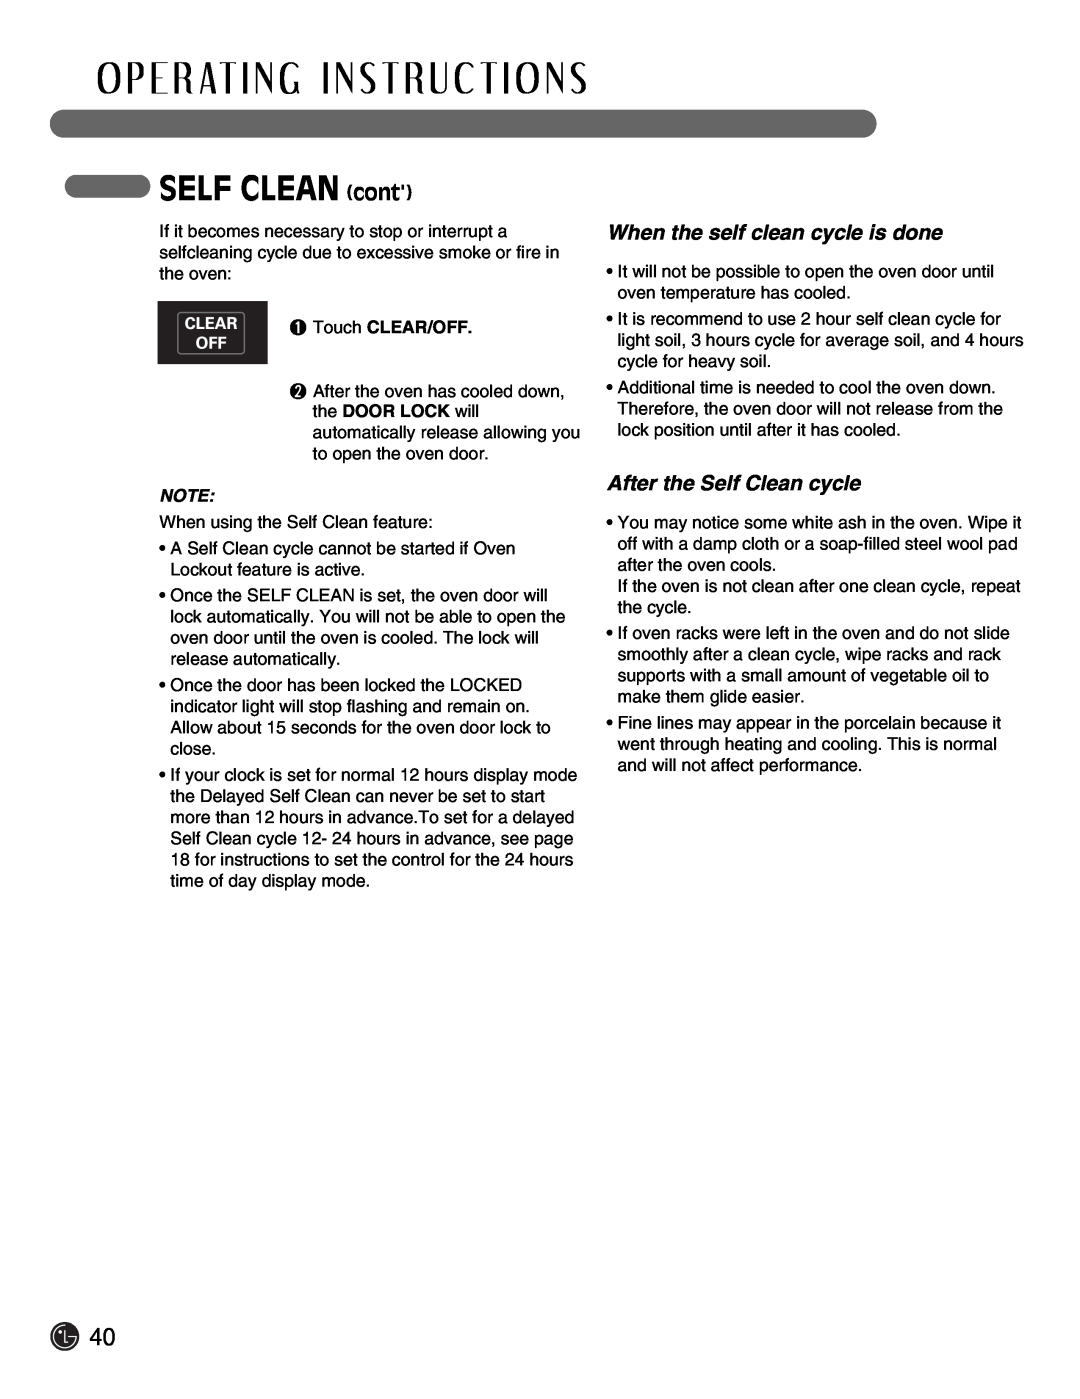 LG Electronics LSE3092ST When the self clean cycle is done, After the Self Clean cycle, SELF CLEAN cont, Touch CLEAR/OFF 